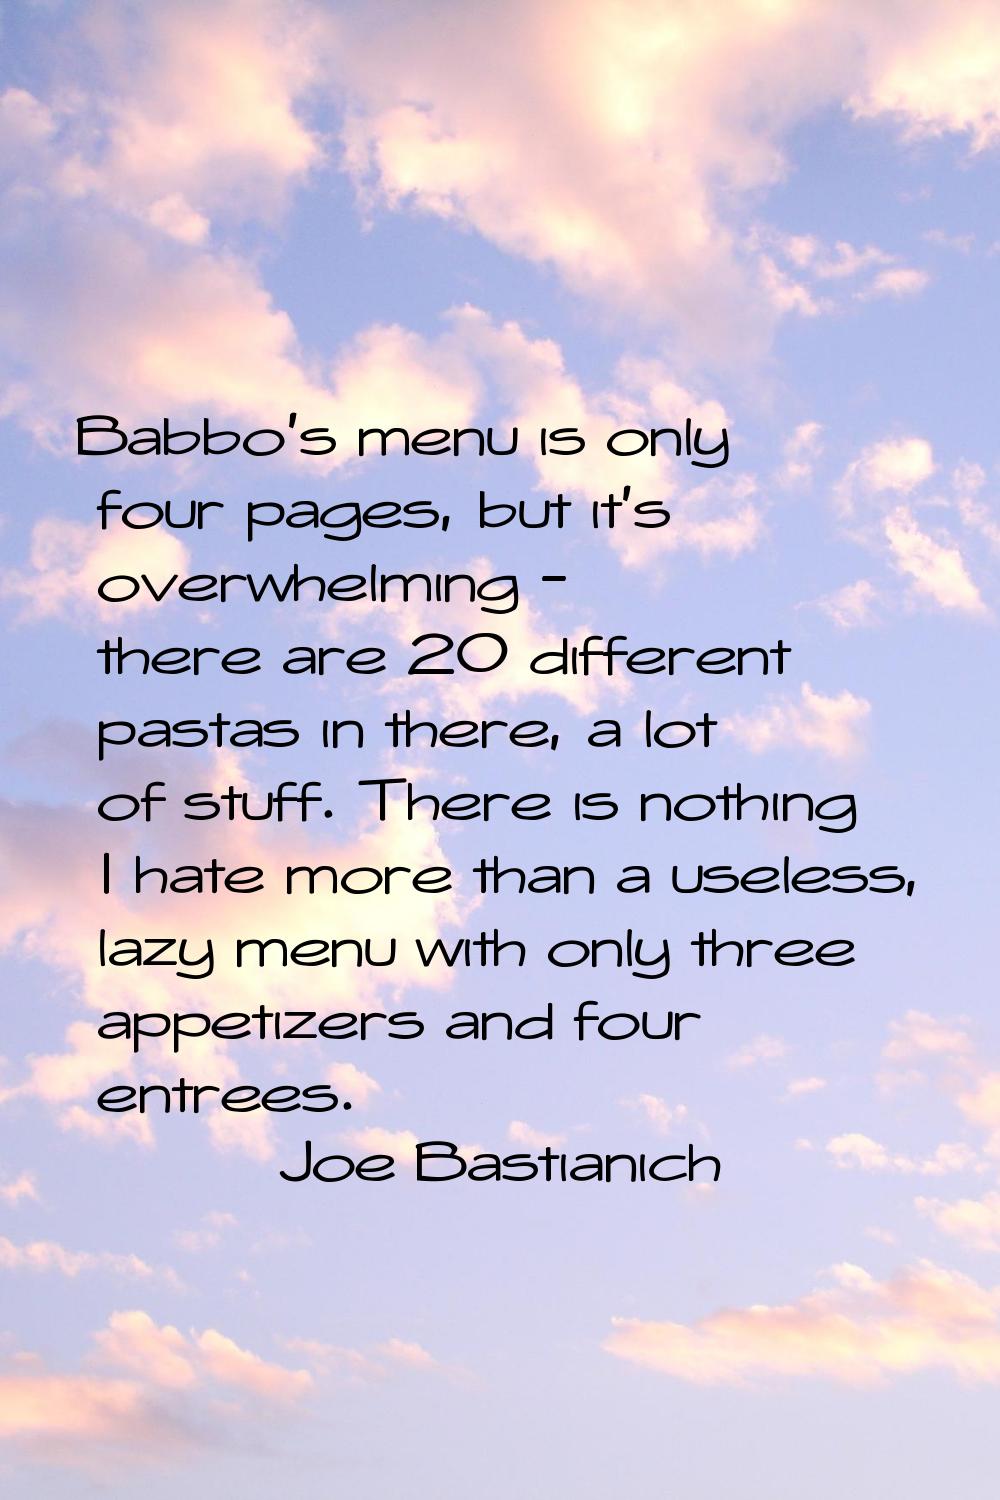 Babbo's menu is only four pages, but it's overwhelming - there are 20 different pastas in there, a 